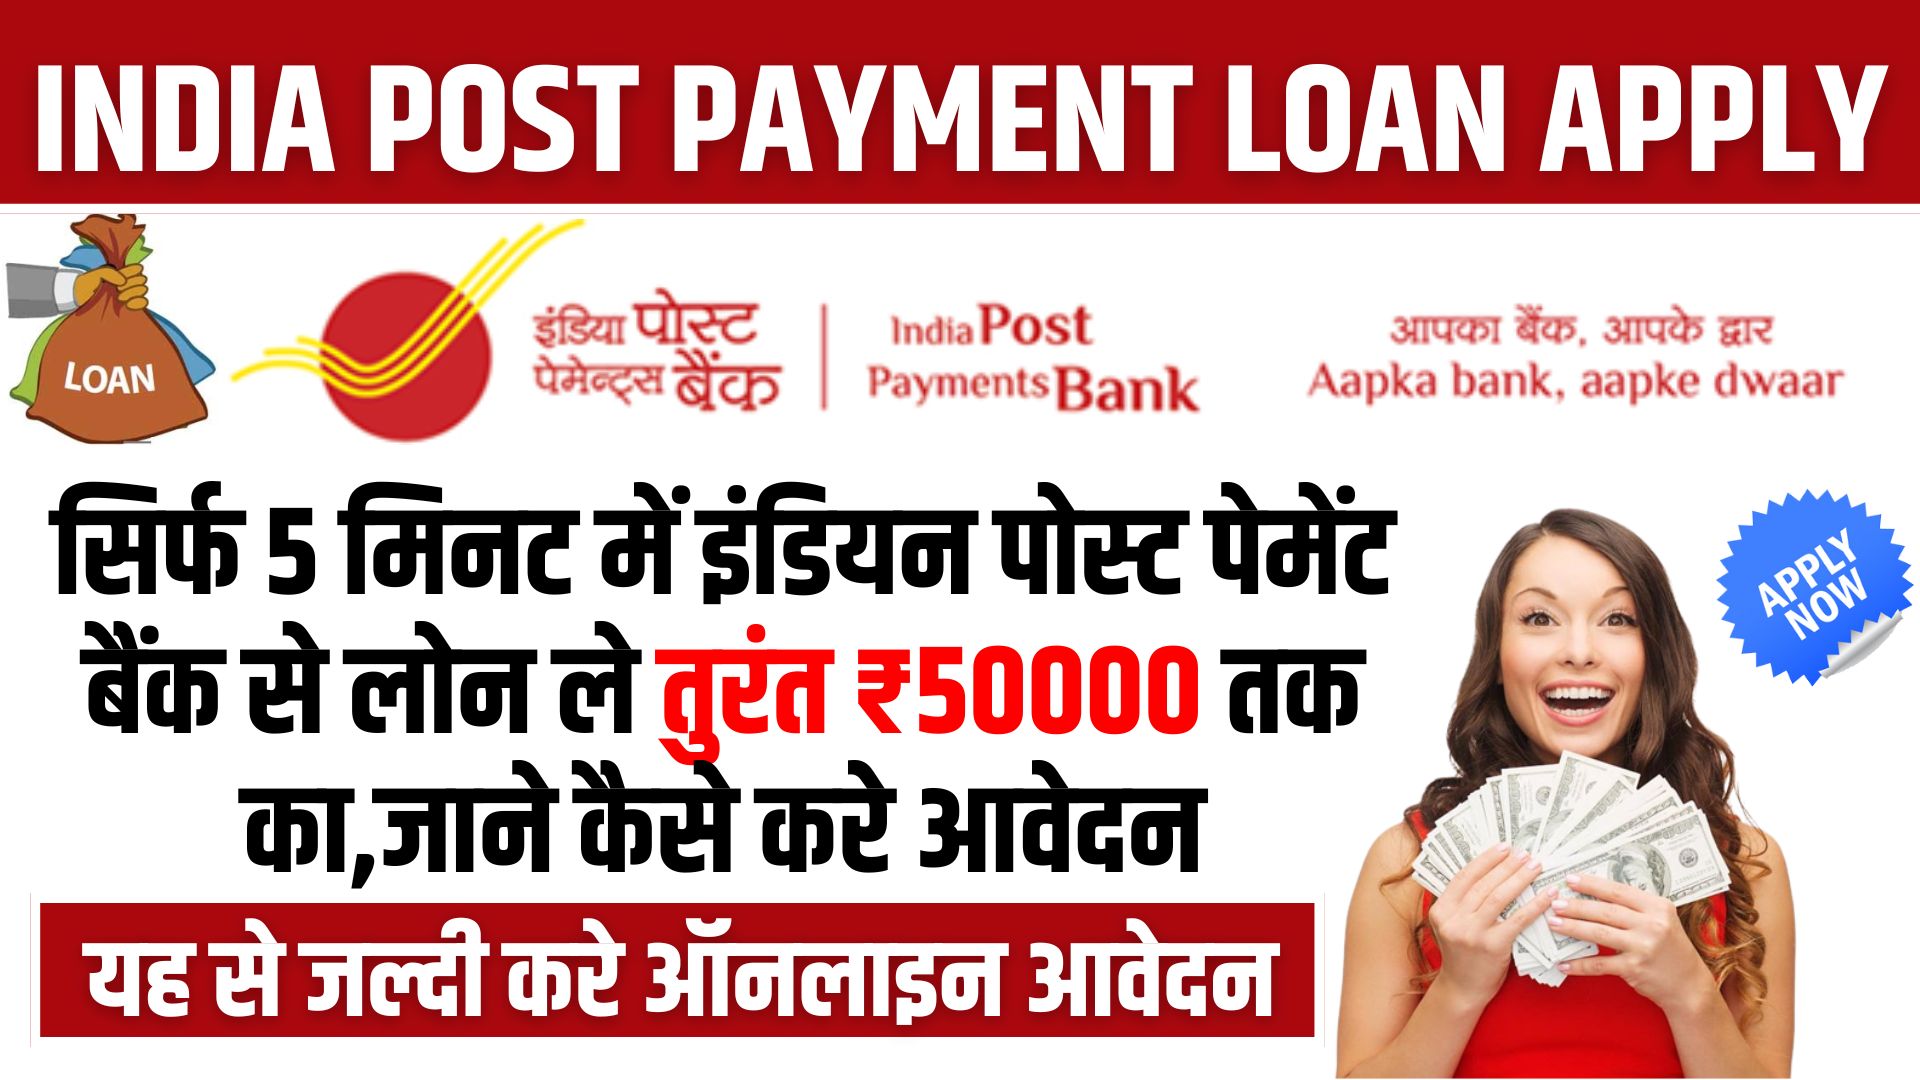 India Post Payment Loan